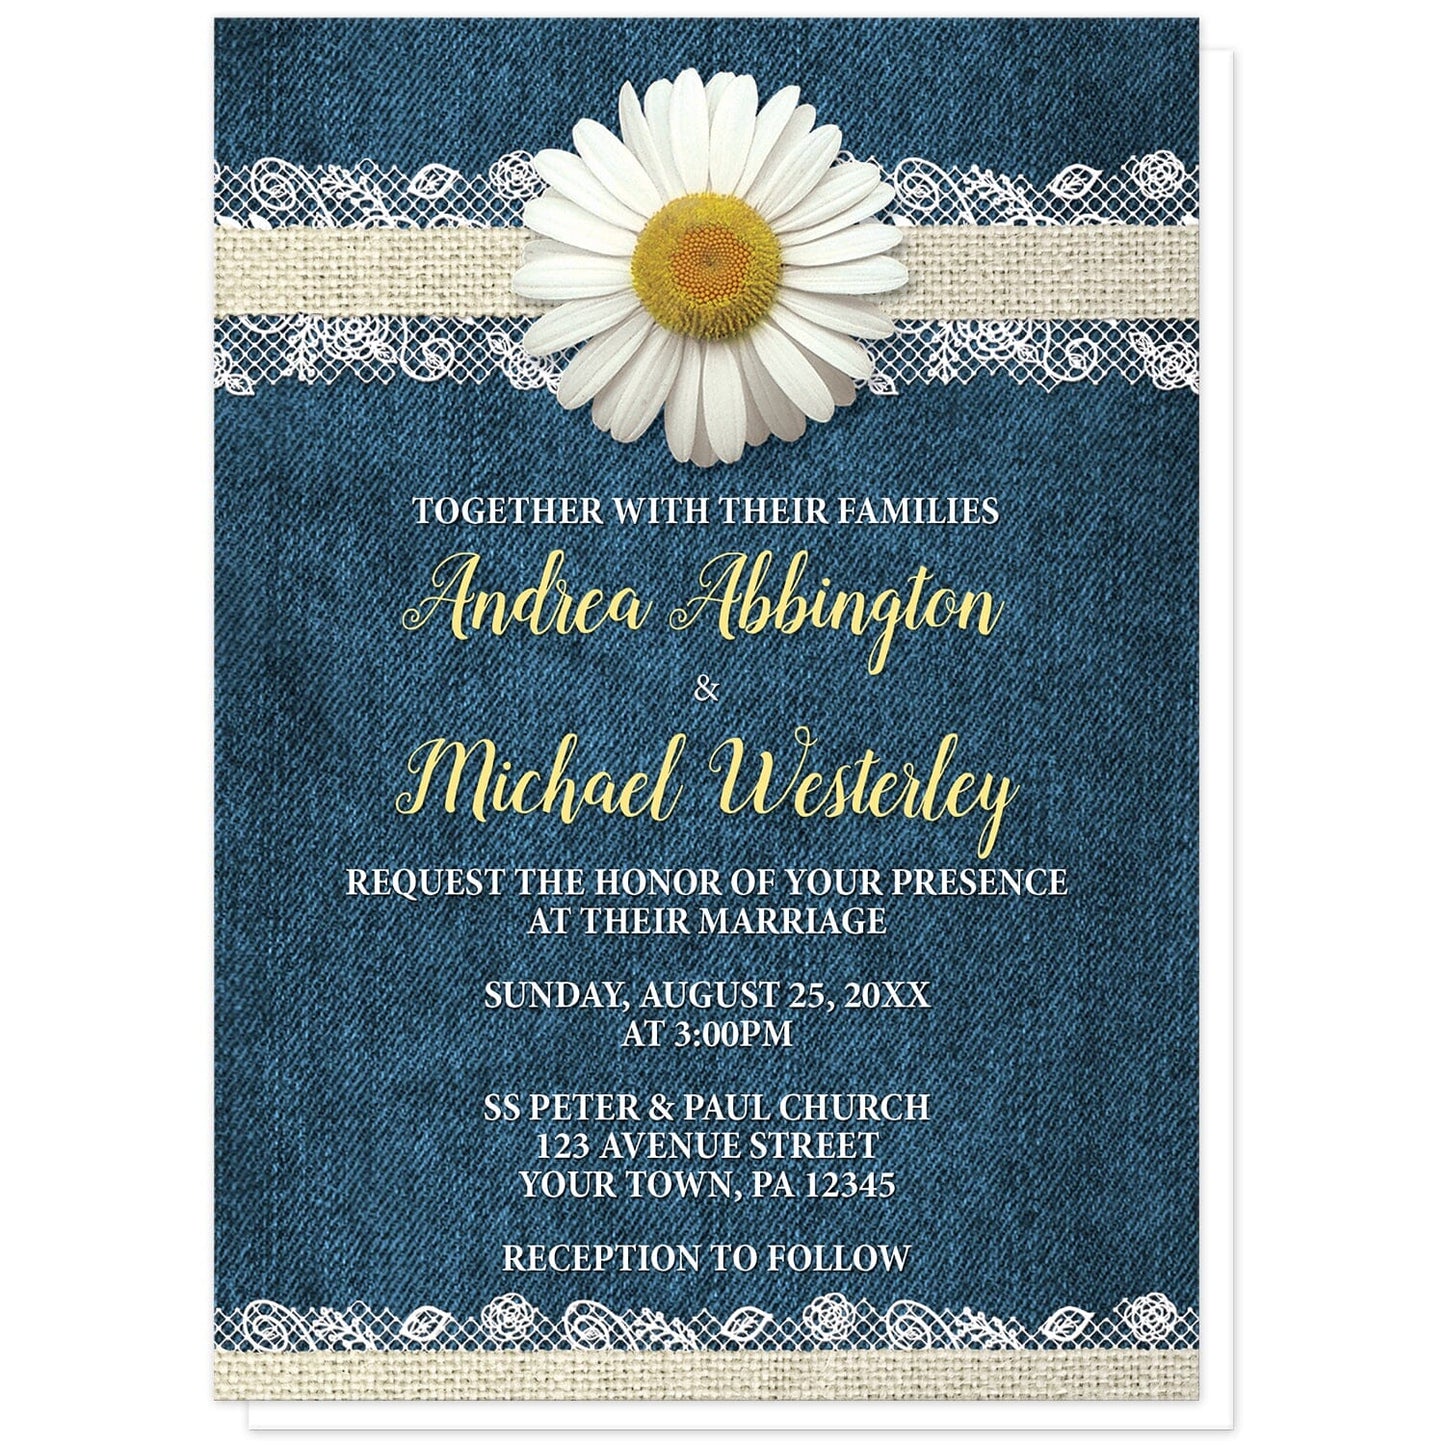 Daisy Burlap and Lace Denim Wedding Invitations at Artistically Invited. Southern rustic daisy burlap and lace denim wedding invitations with a white daisy flower centered at the top on a burlap and lace ribbon strip illustration, over a blue country denim fabric background. Your personalized marriage celebration details are custom printed in yellow and white over the denim design. 